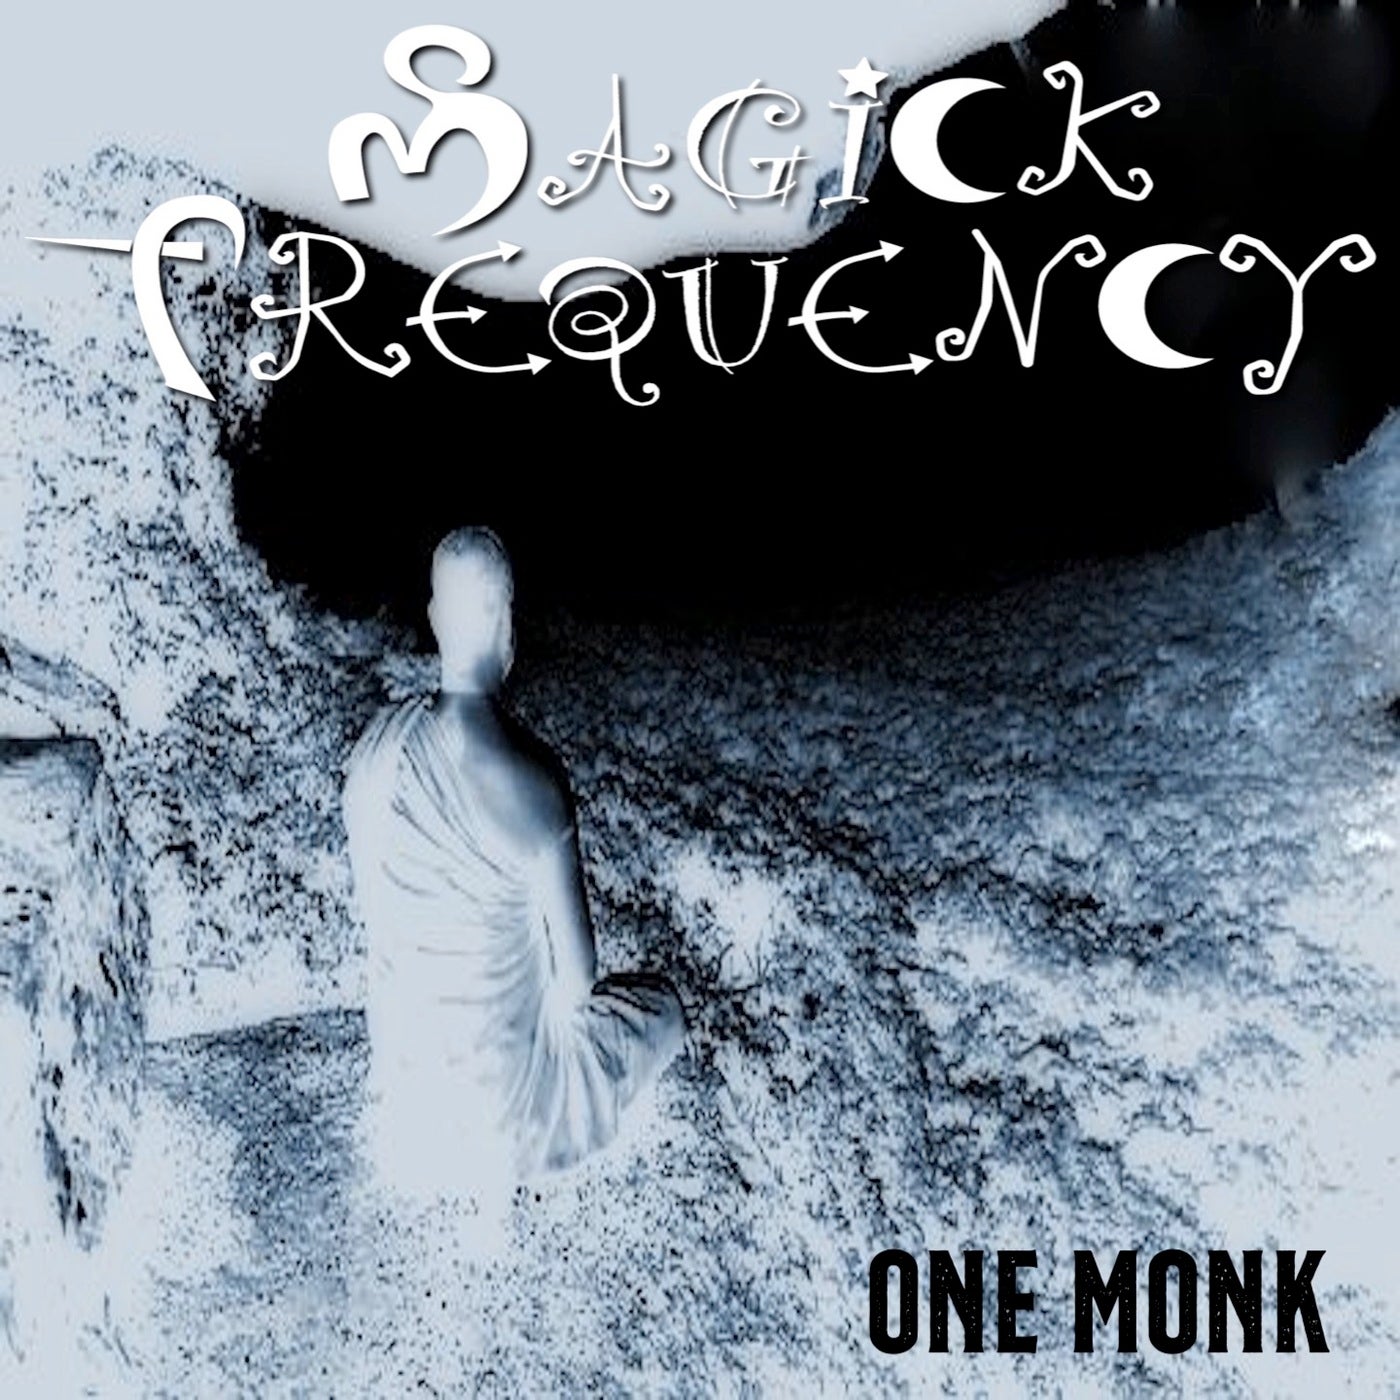 One Monk